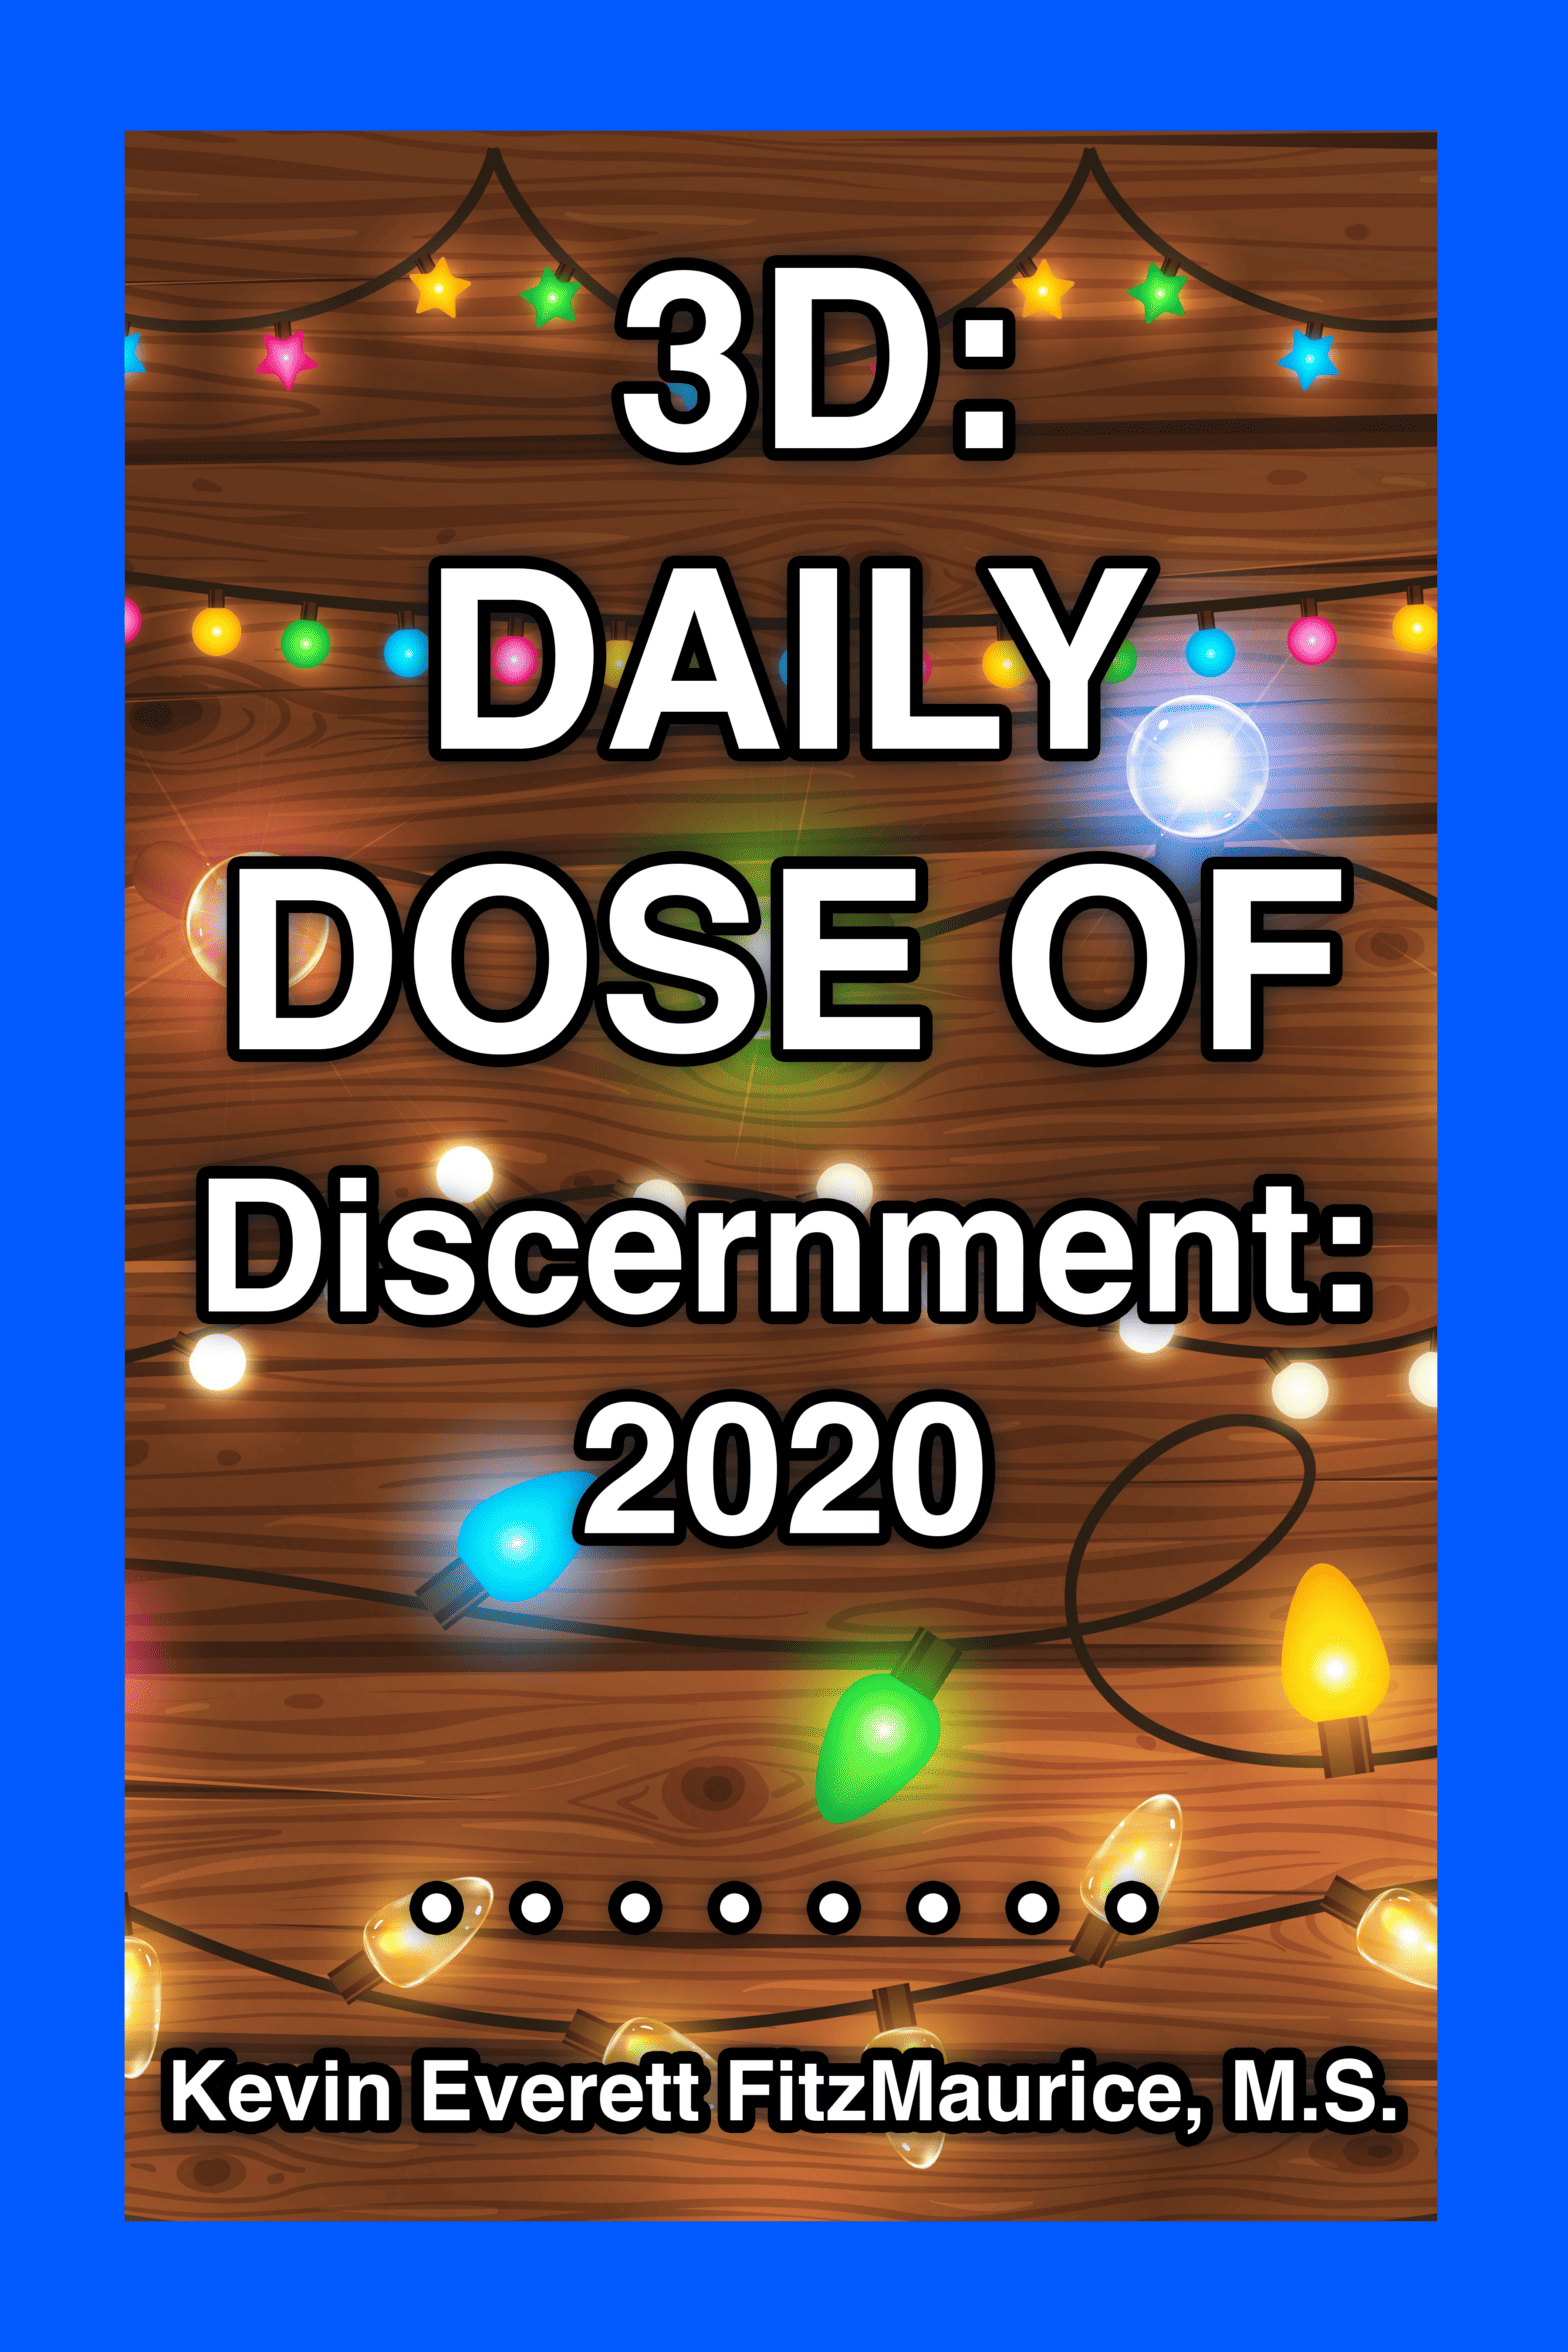 3D: Daily Dose of Discernment: 2020 book cover.